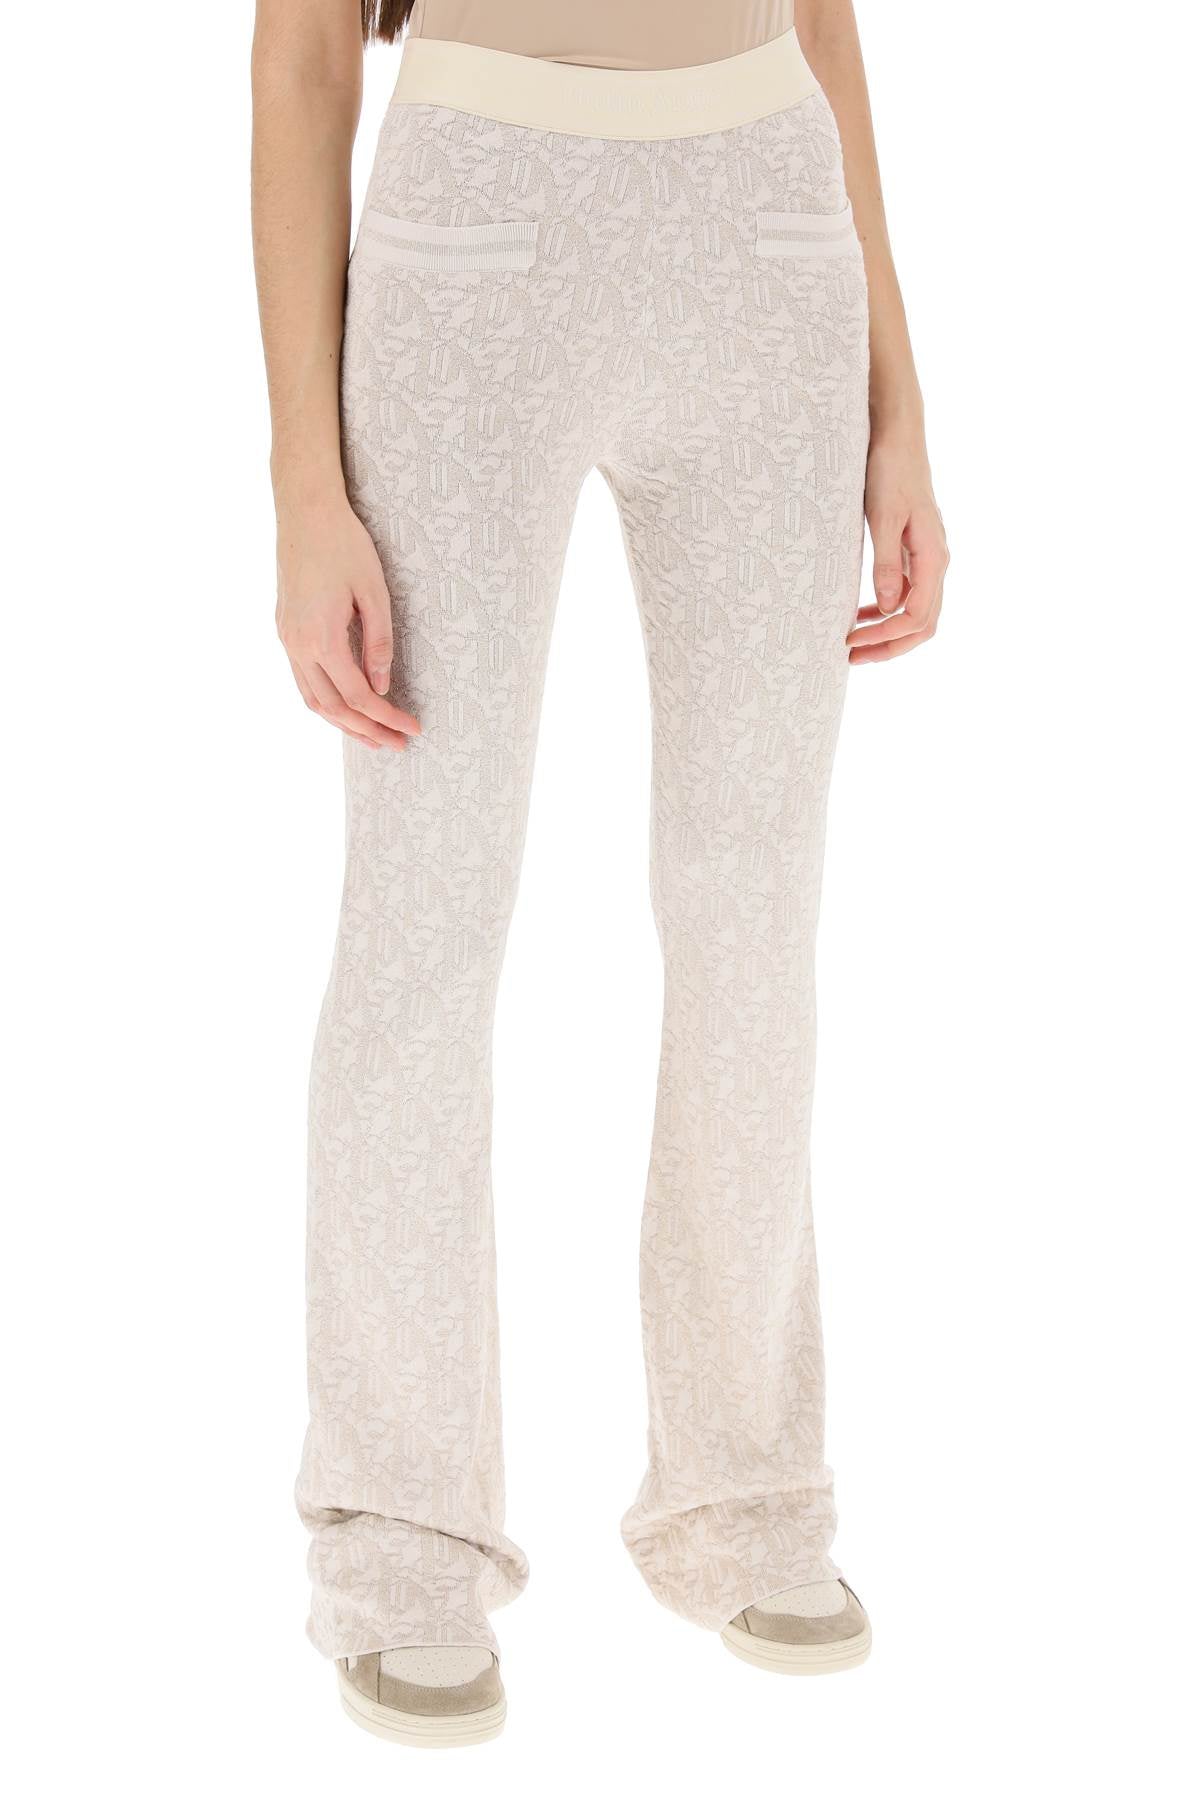 PALM ANGELS Flared Lurex Knit Pants with Paint Monogram Pattern for Women